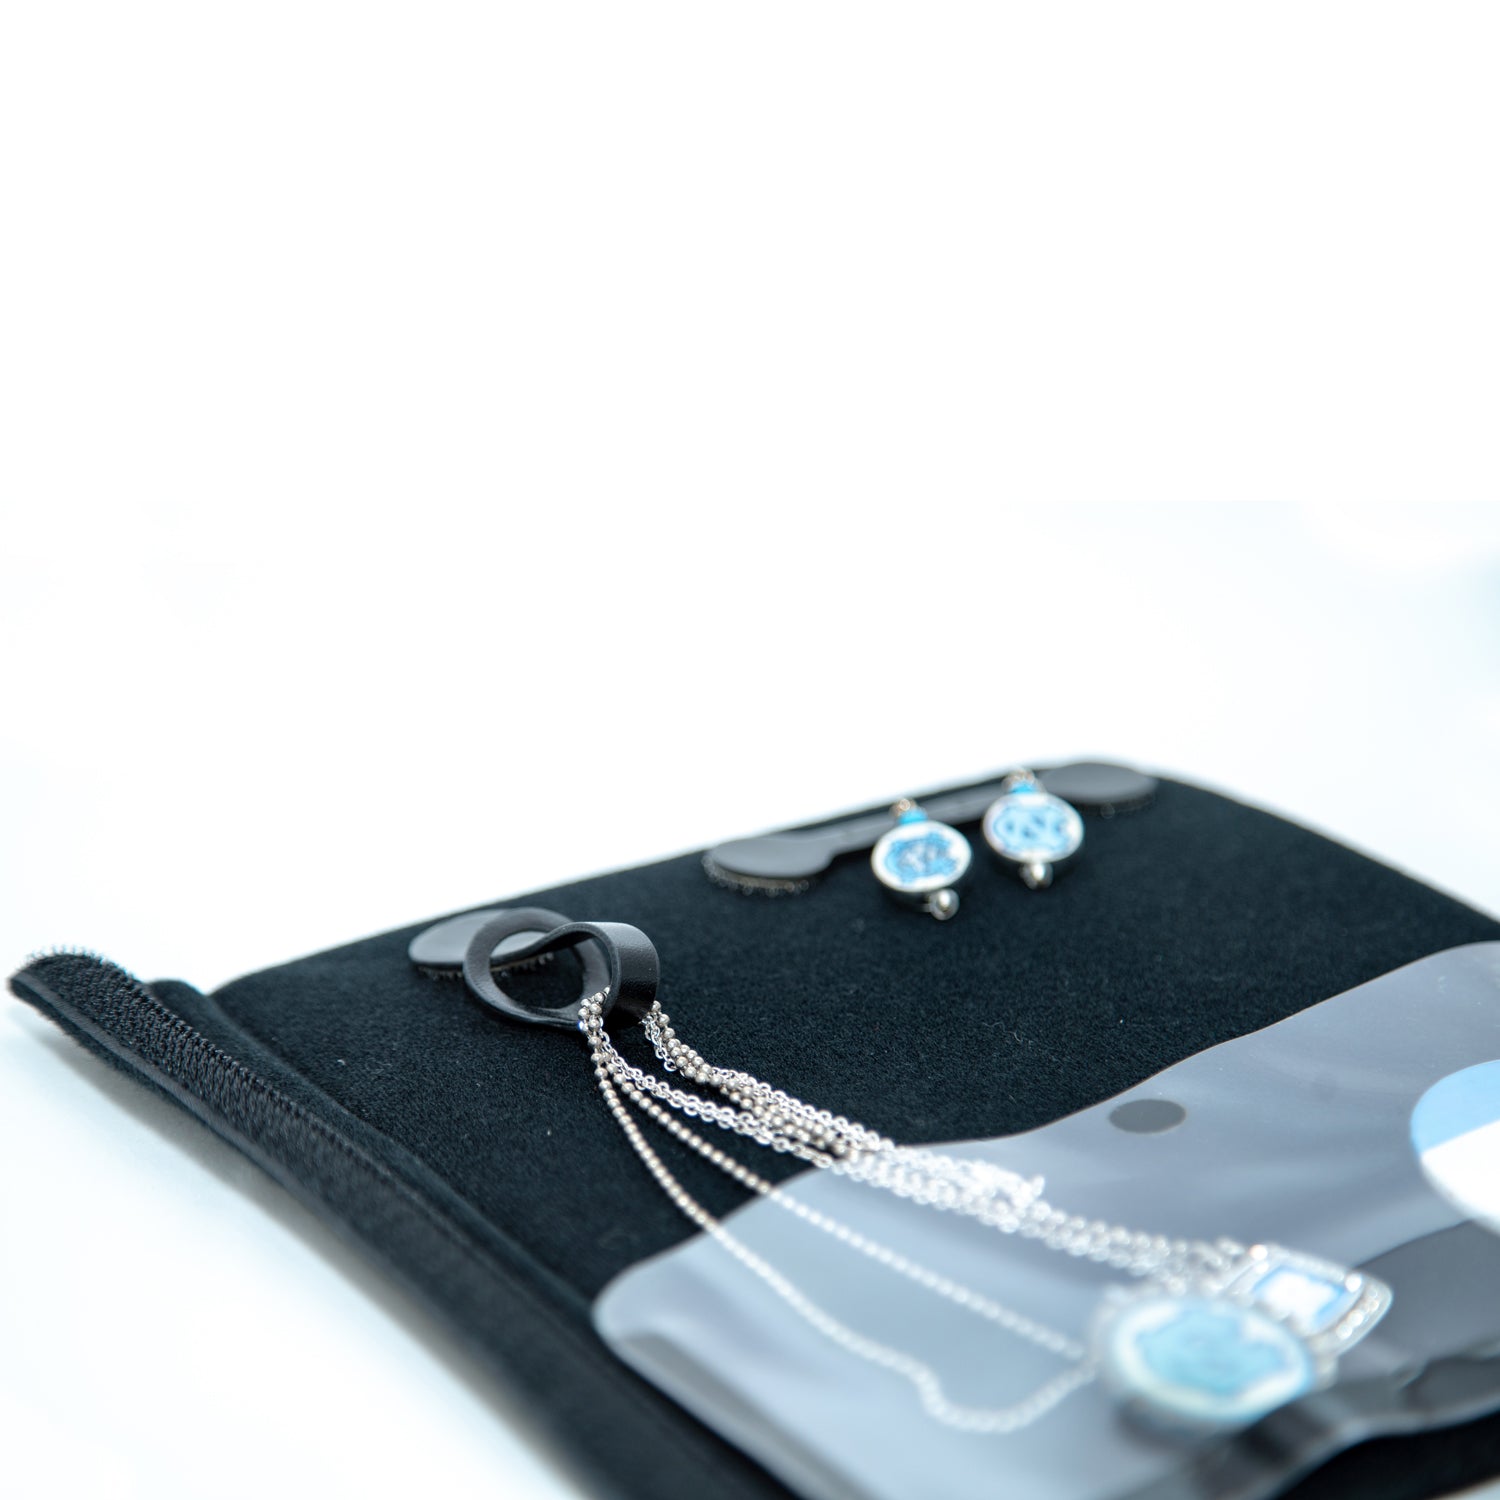 The BlingBook - Portable Jewelry Management and Organization System